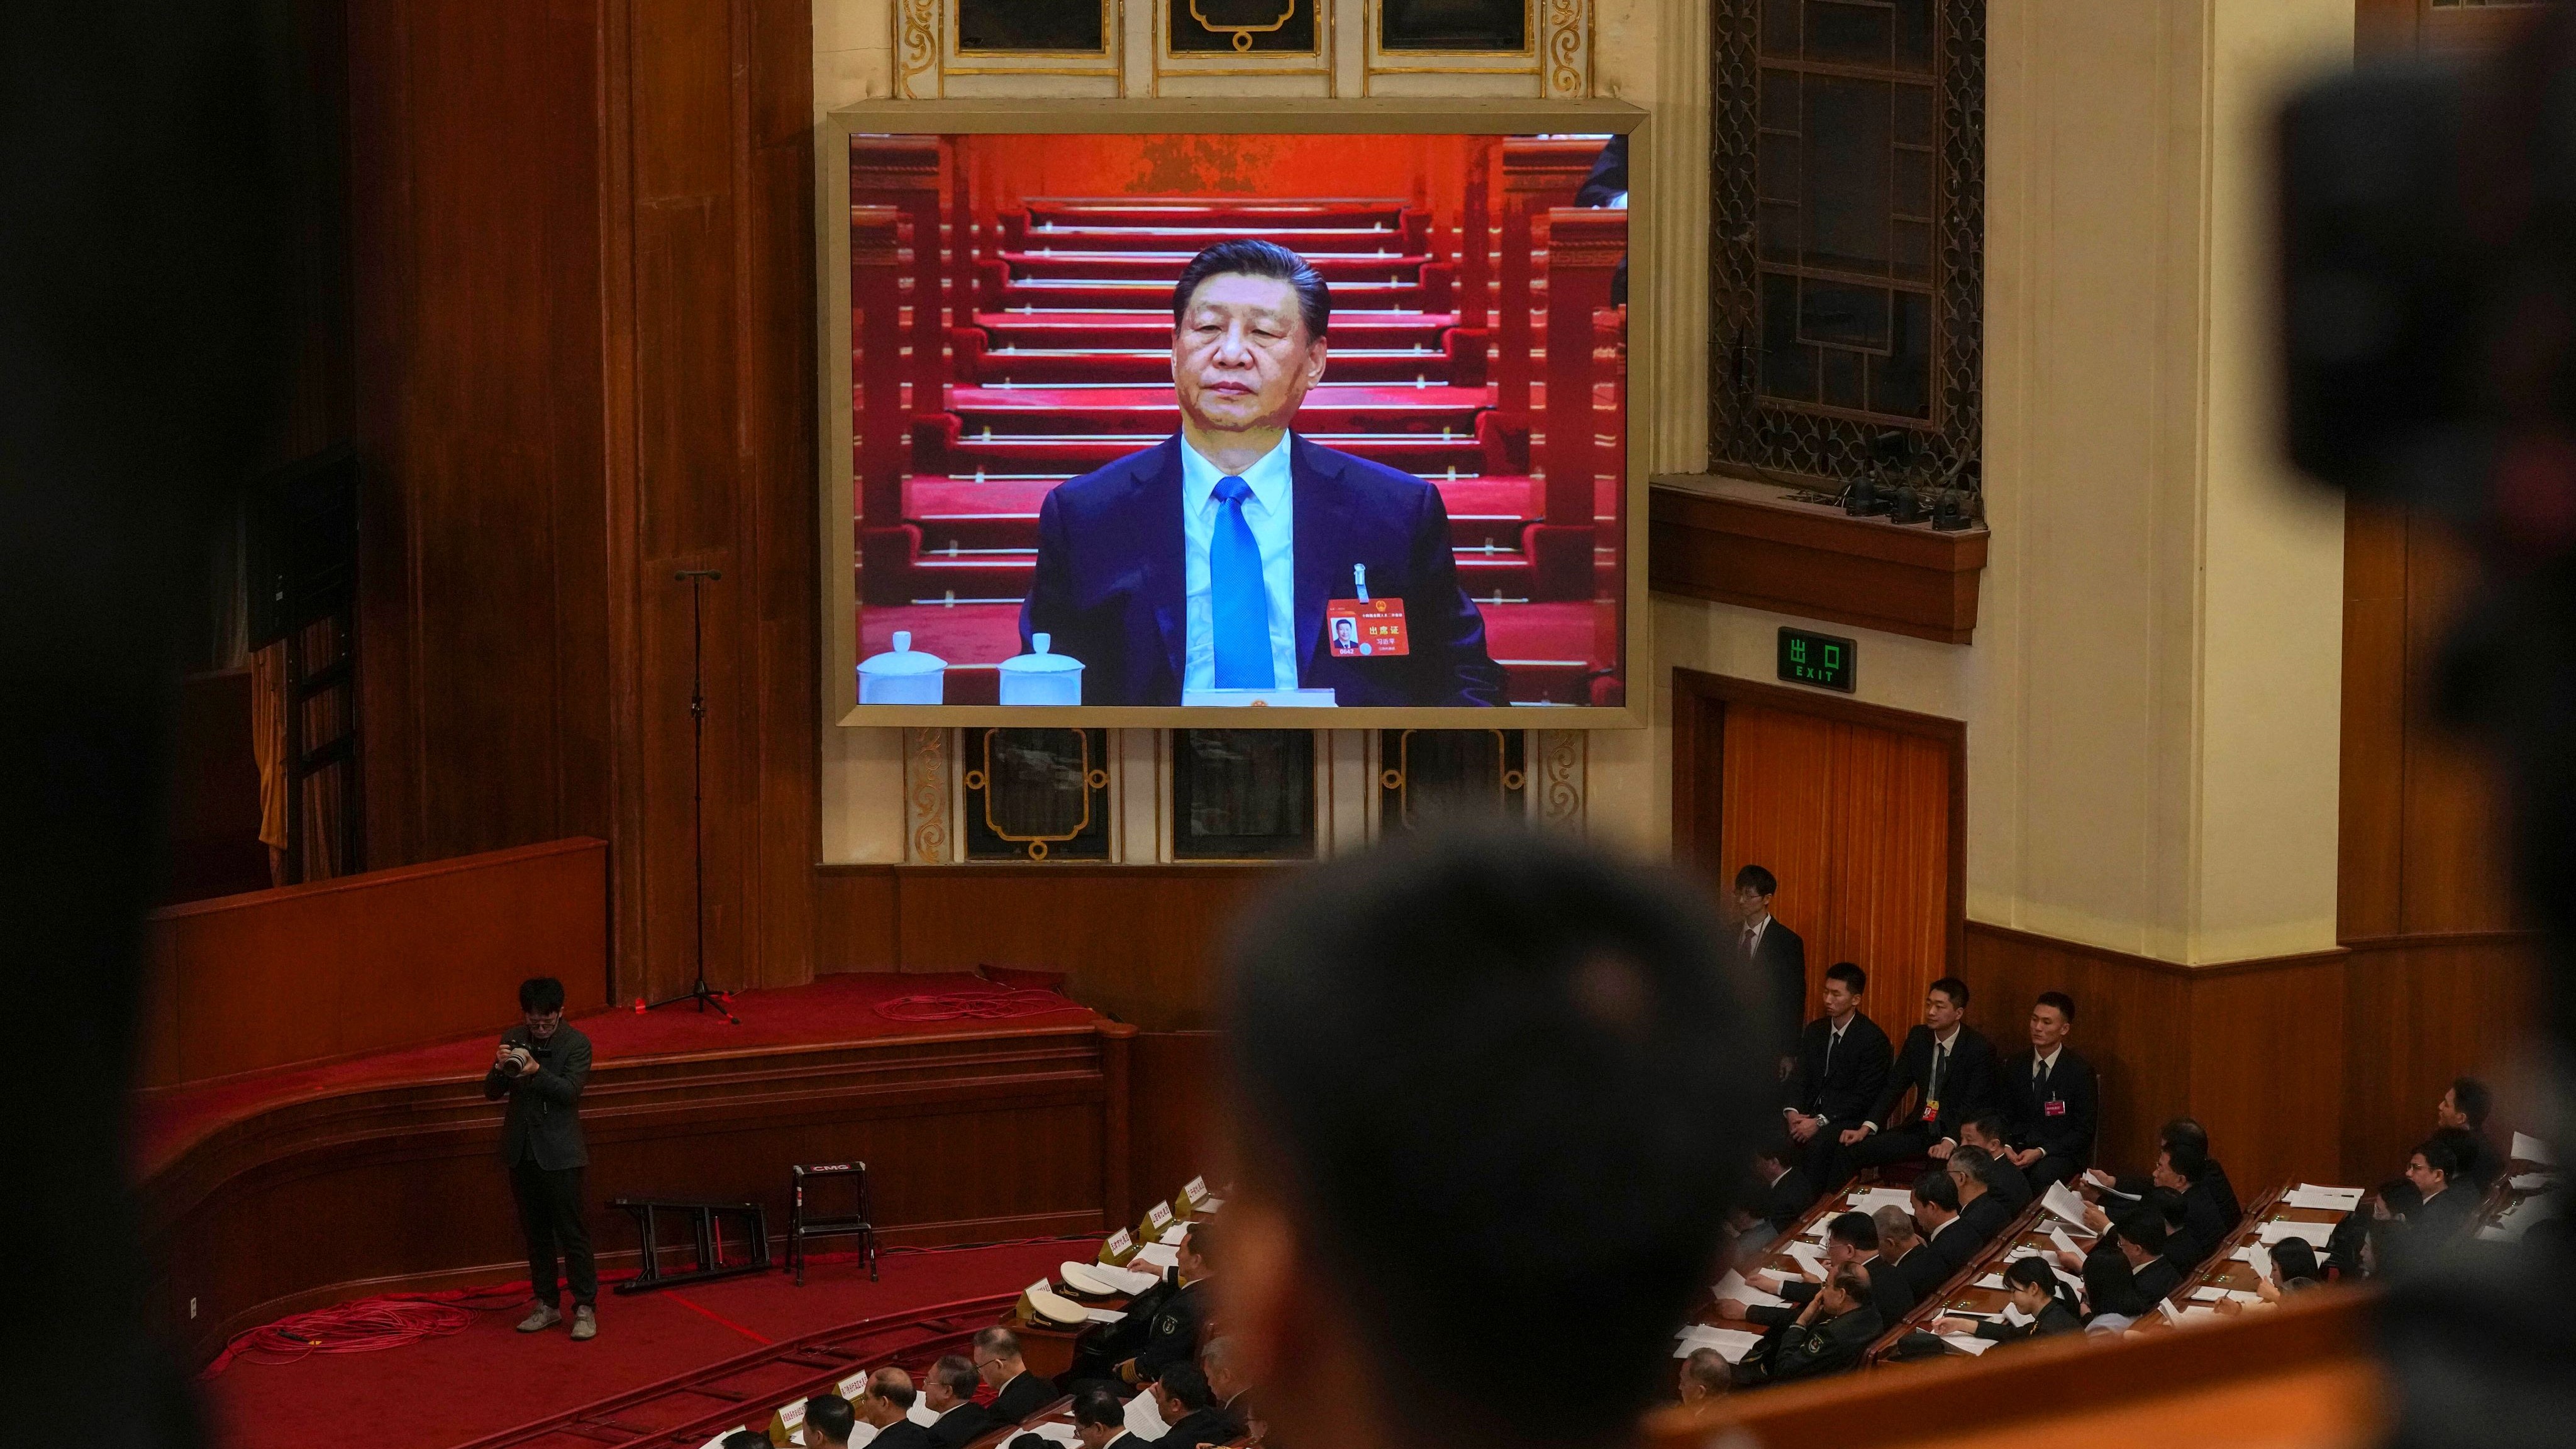 Xi’s Ambition: China’s Economy Must Expand Further